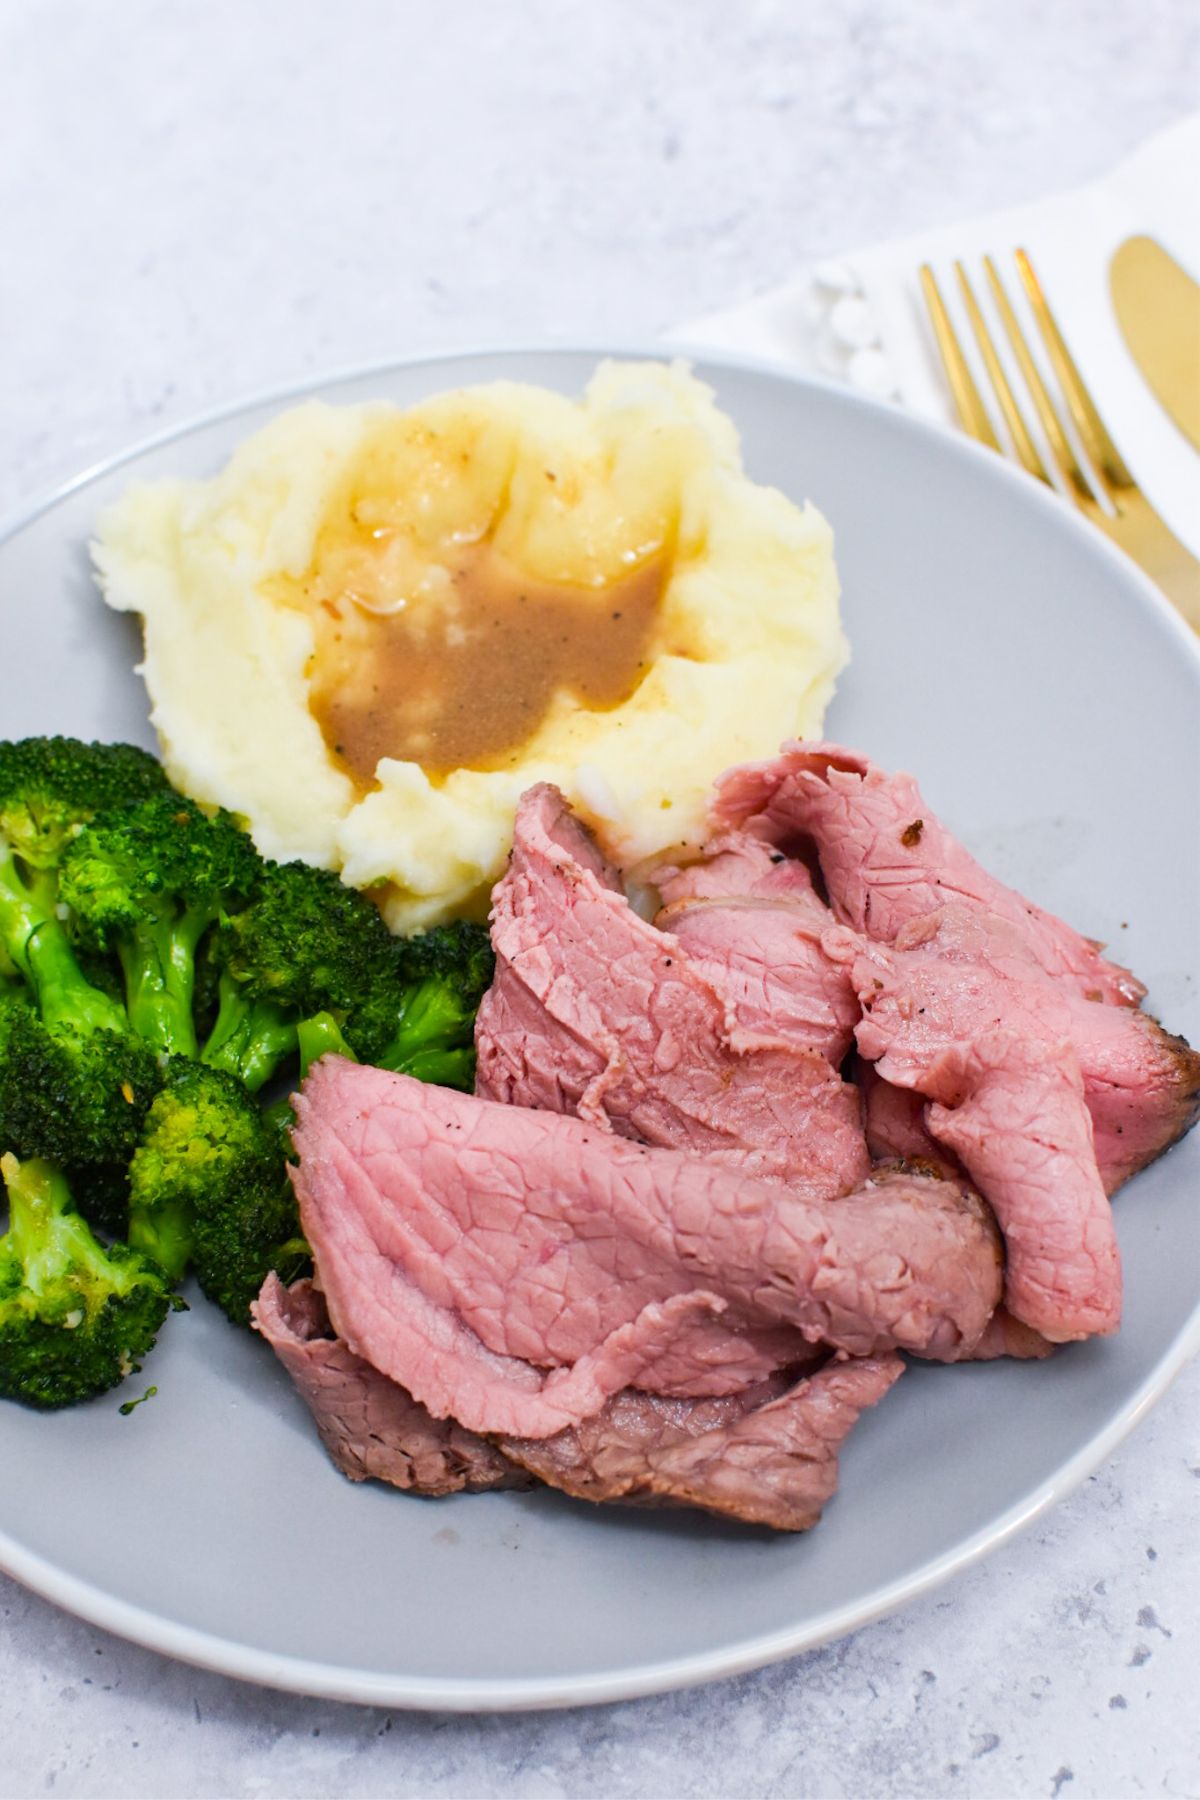 A plate with roast beef, sautéed broccoli, mashed potatoes and gravy on it.